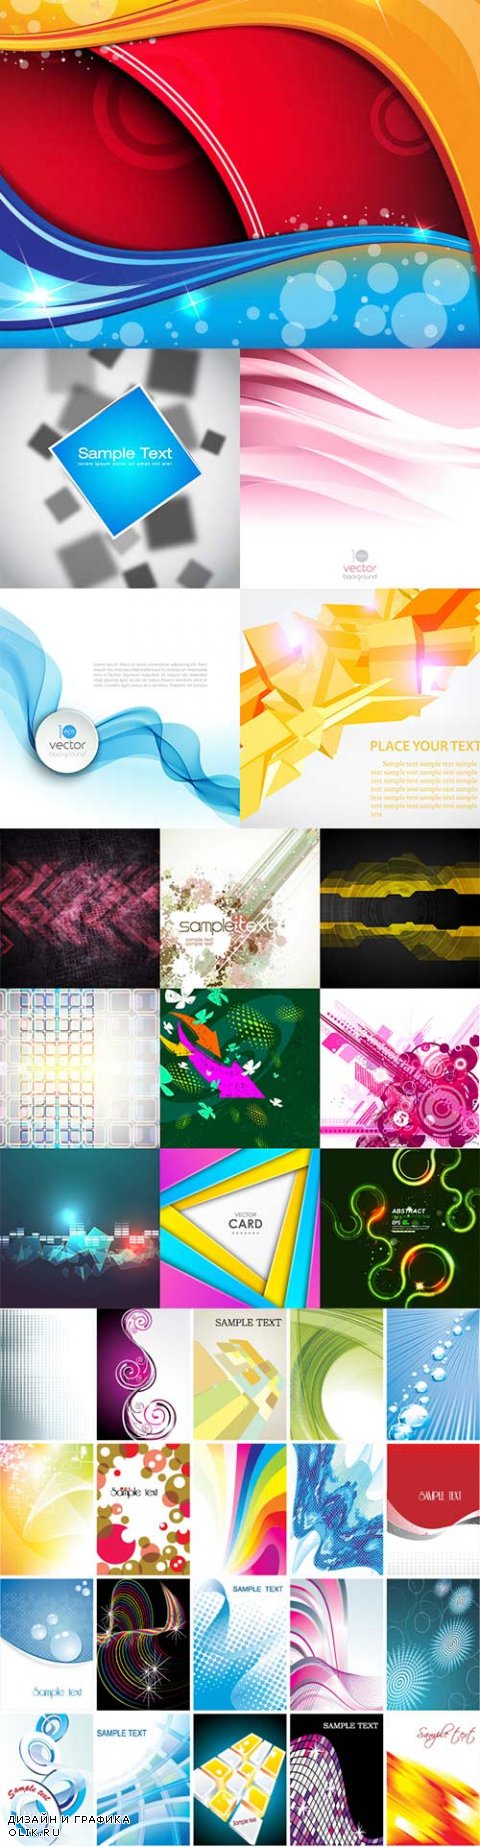 Bright colorful abstract backgrounds vector -48